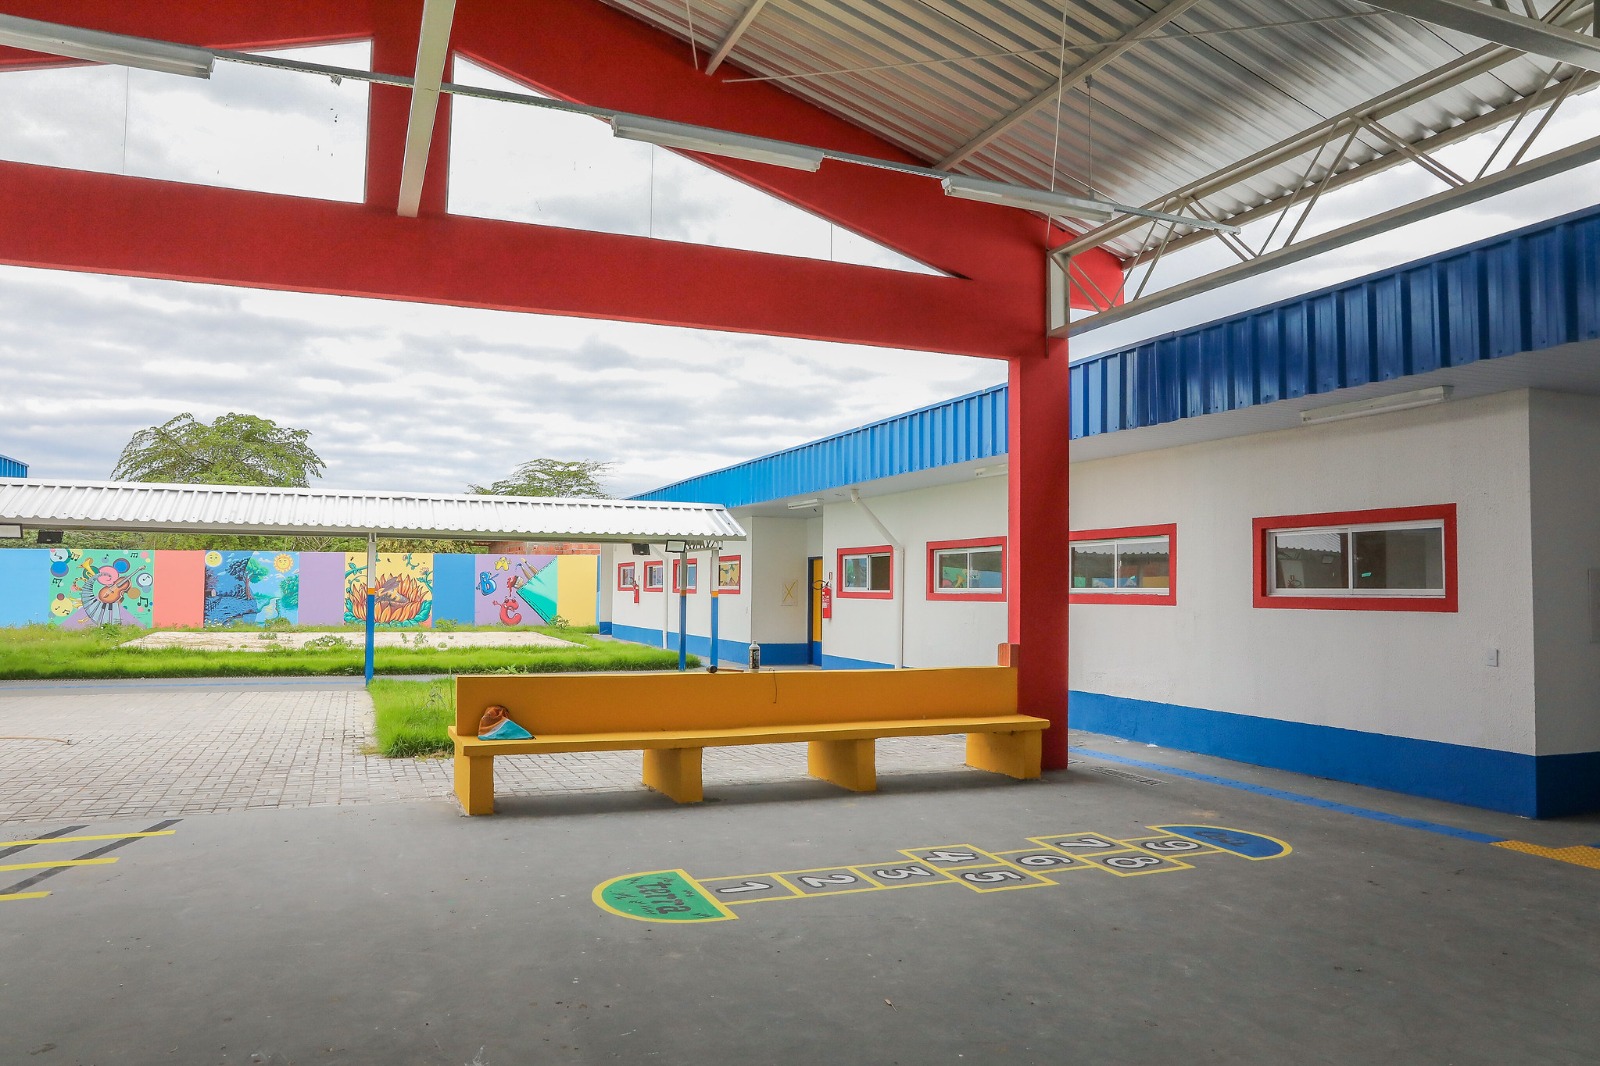 Works in daycare centers reinforce the expansion of places in the municipal education network